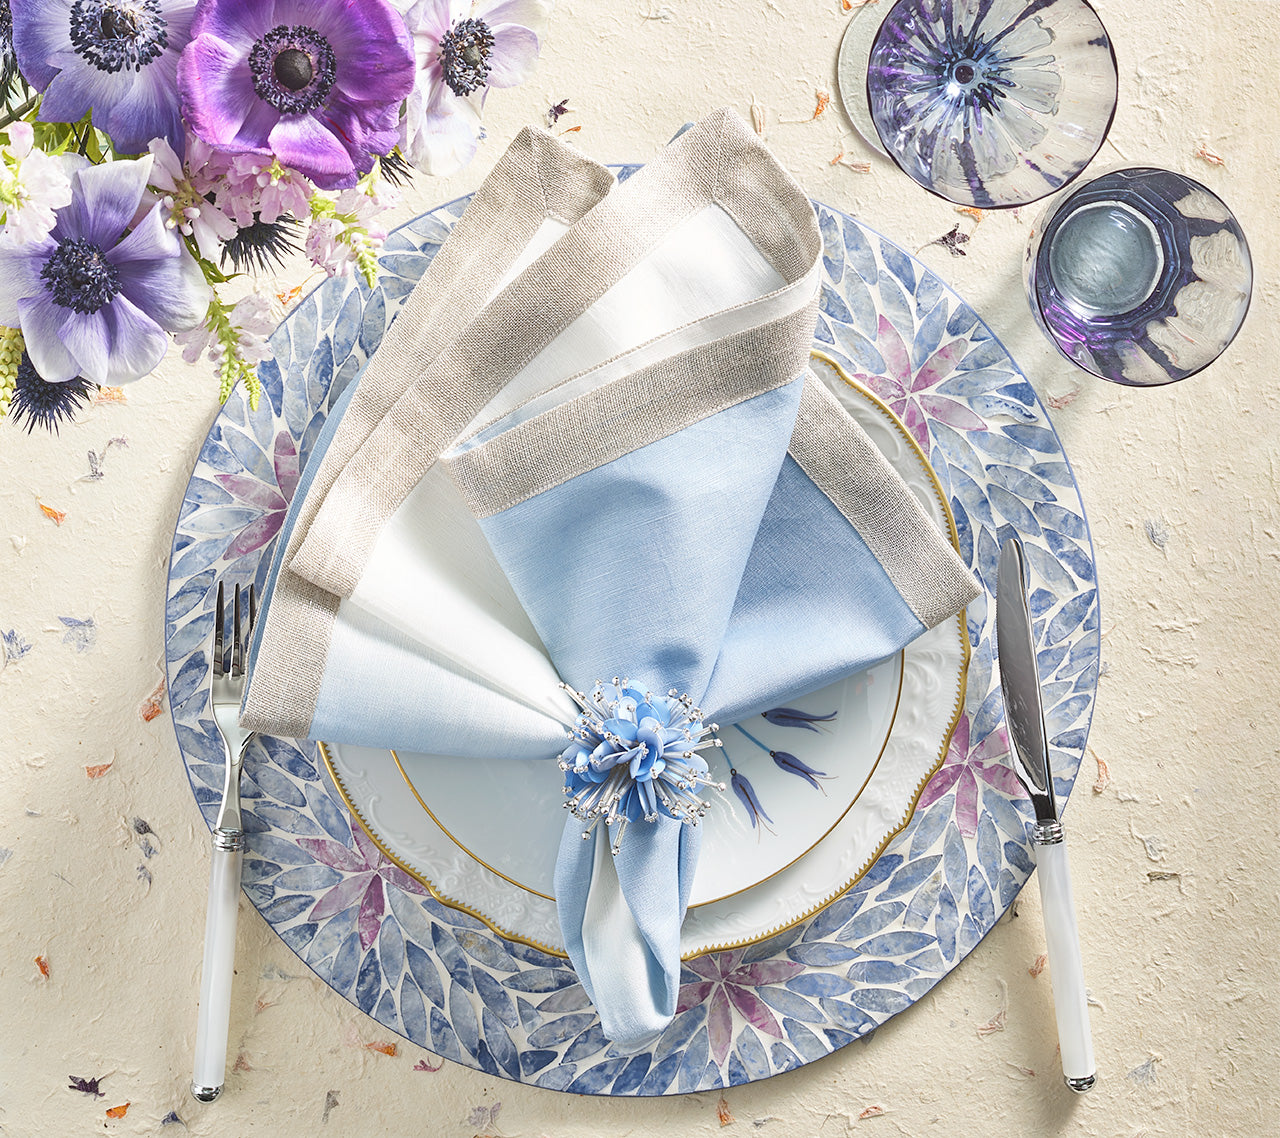 Sample: Flora Placemat in Lilac & Periwinkle, Set of 4